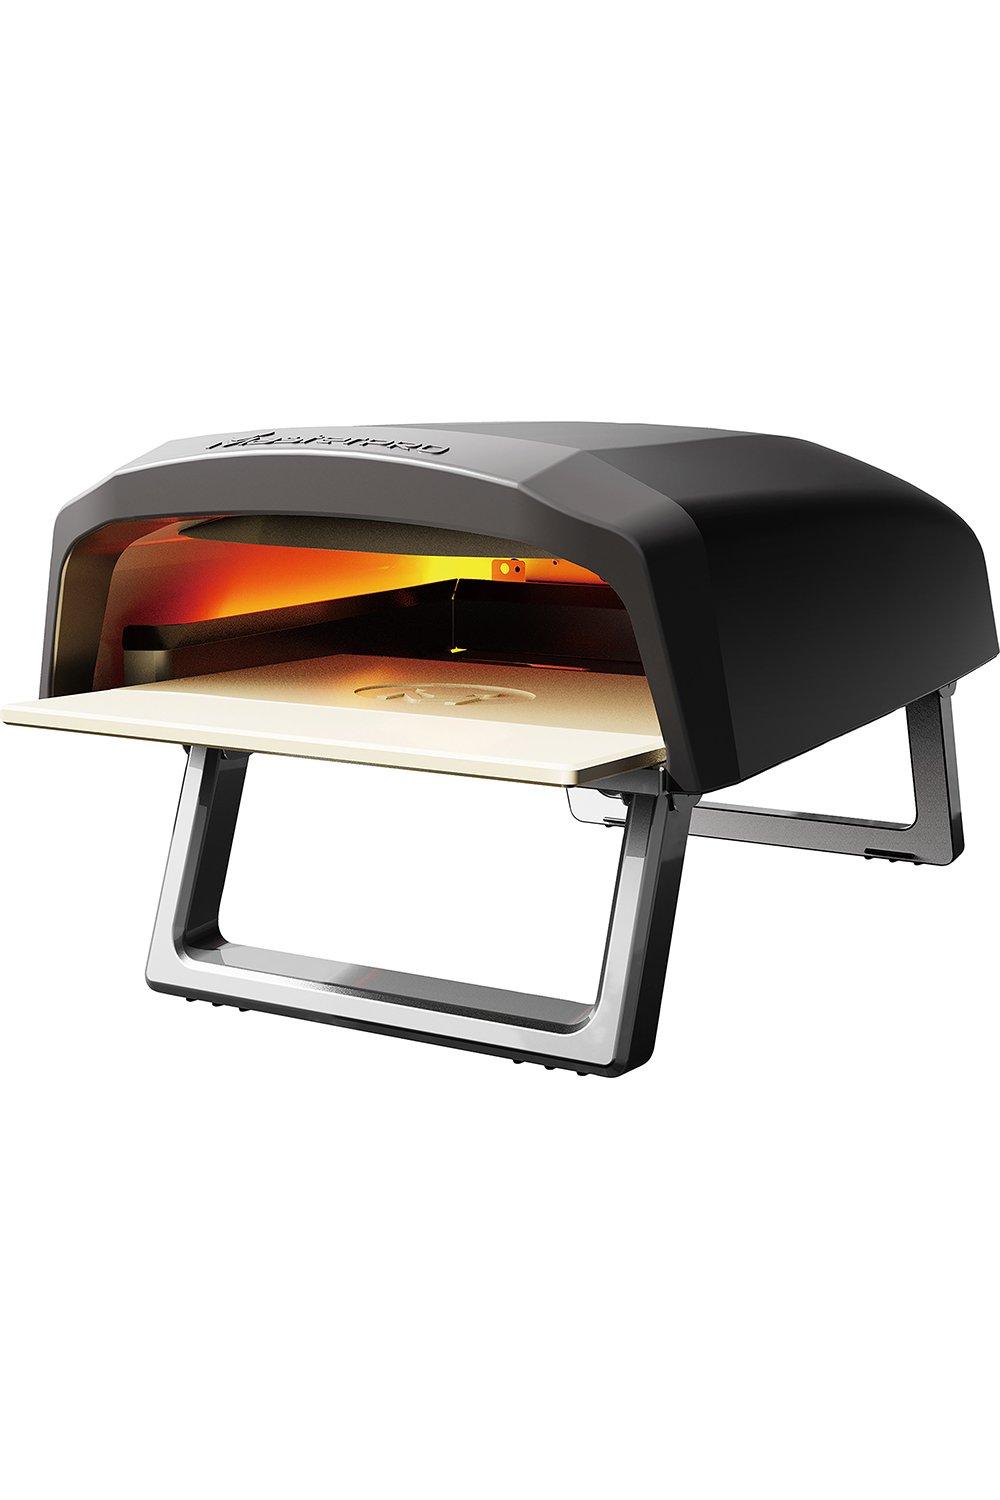 Portable Gas Pizza Oven with Pizza Peel and Carry Bag Black